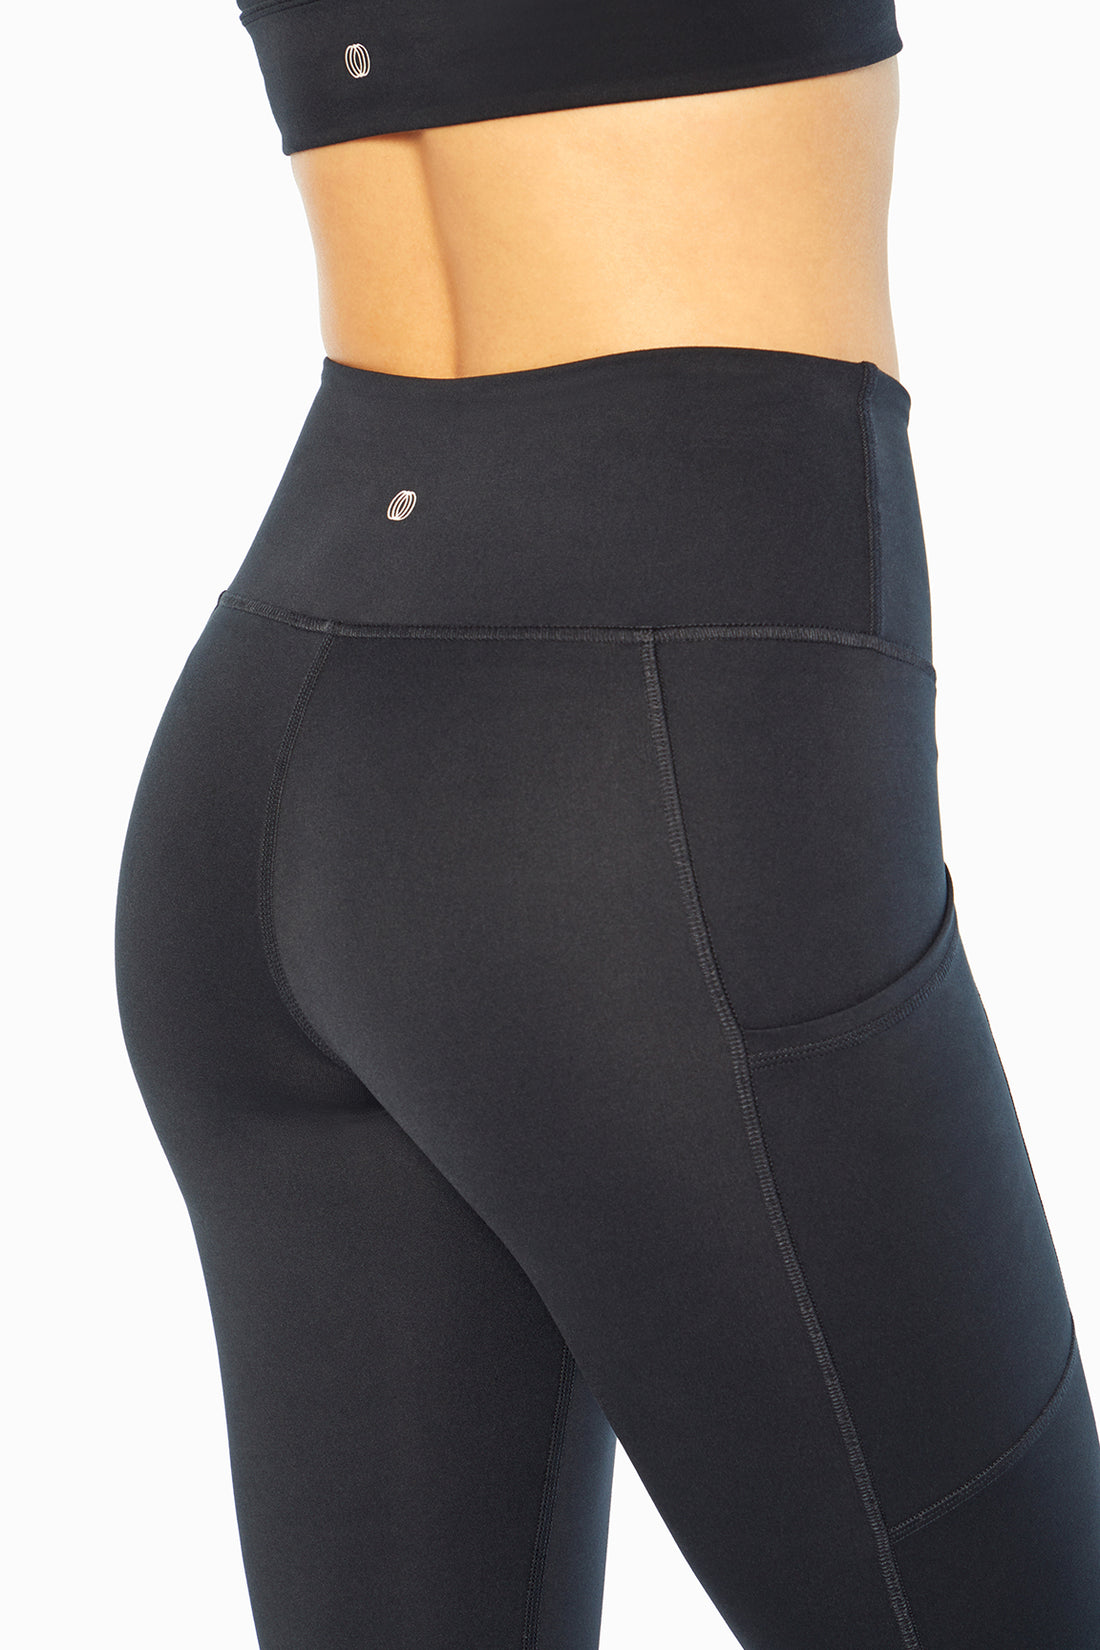 Sonoma XL Heather Gray Mid-Calf Capri Joggers Stretch Leggings with Pockets  - $19 - From Pamela